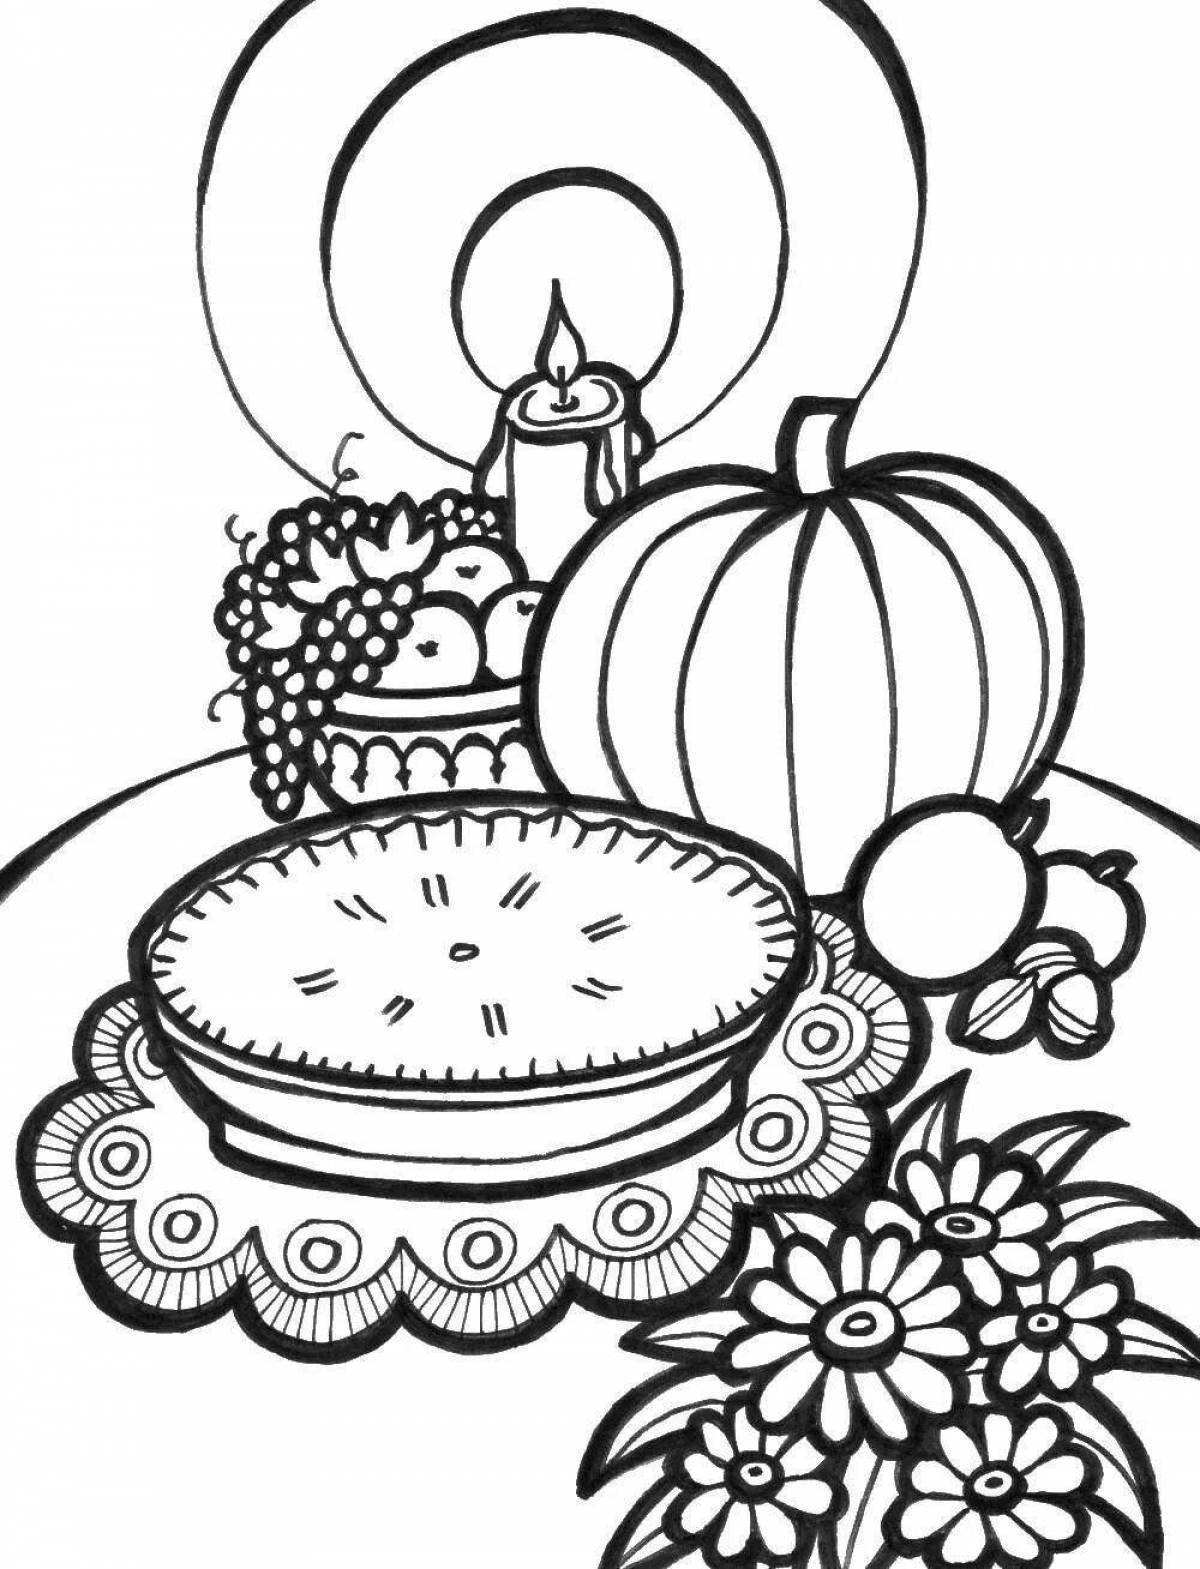 Coloring page special national dishes